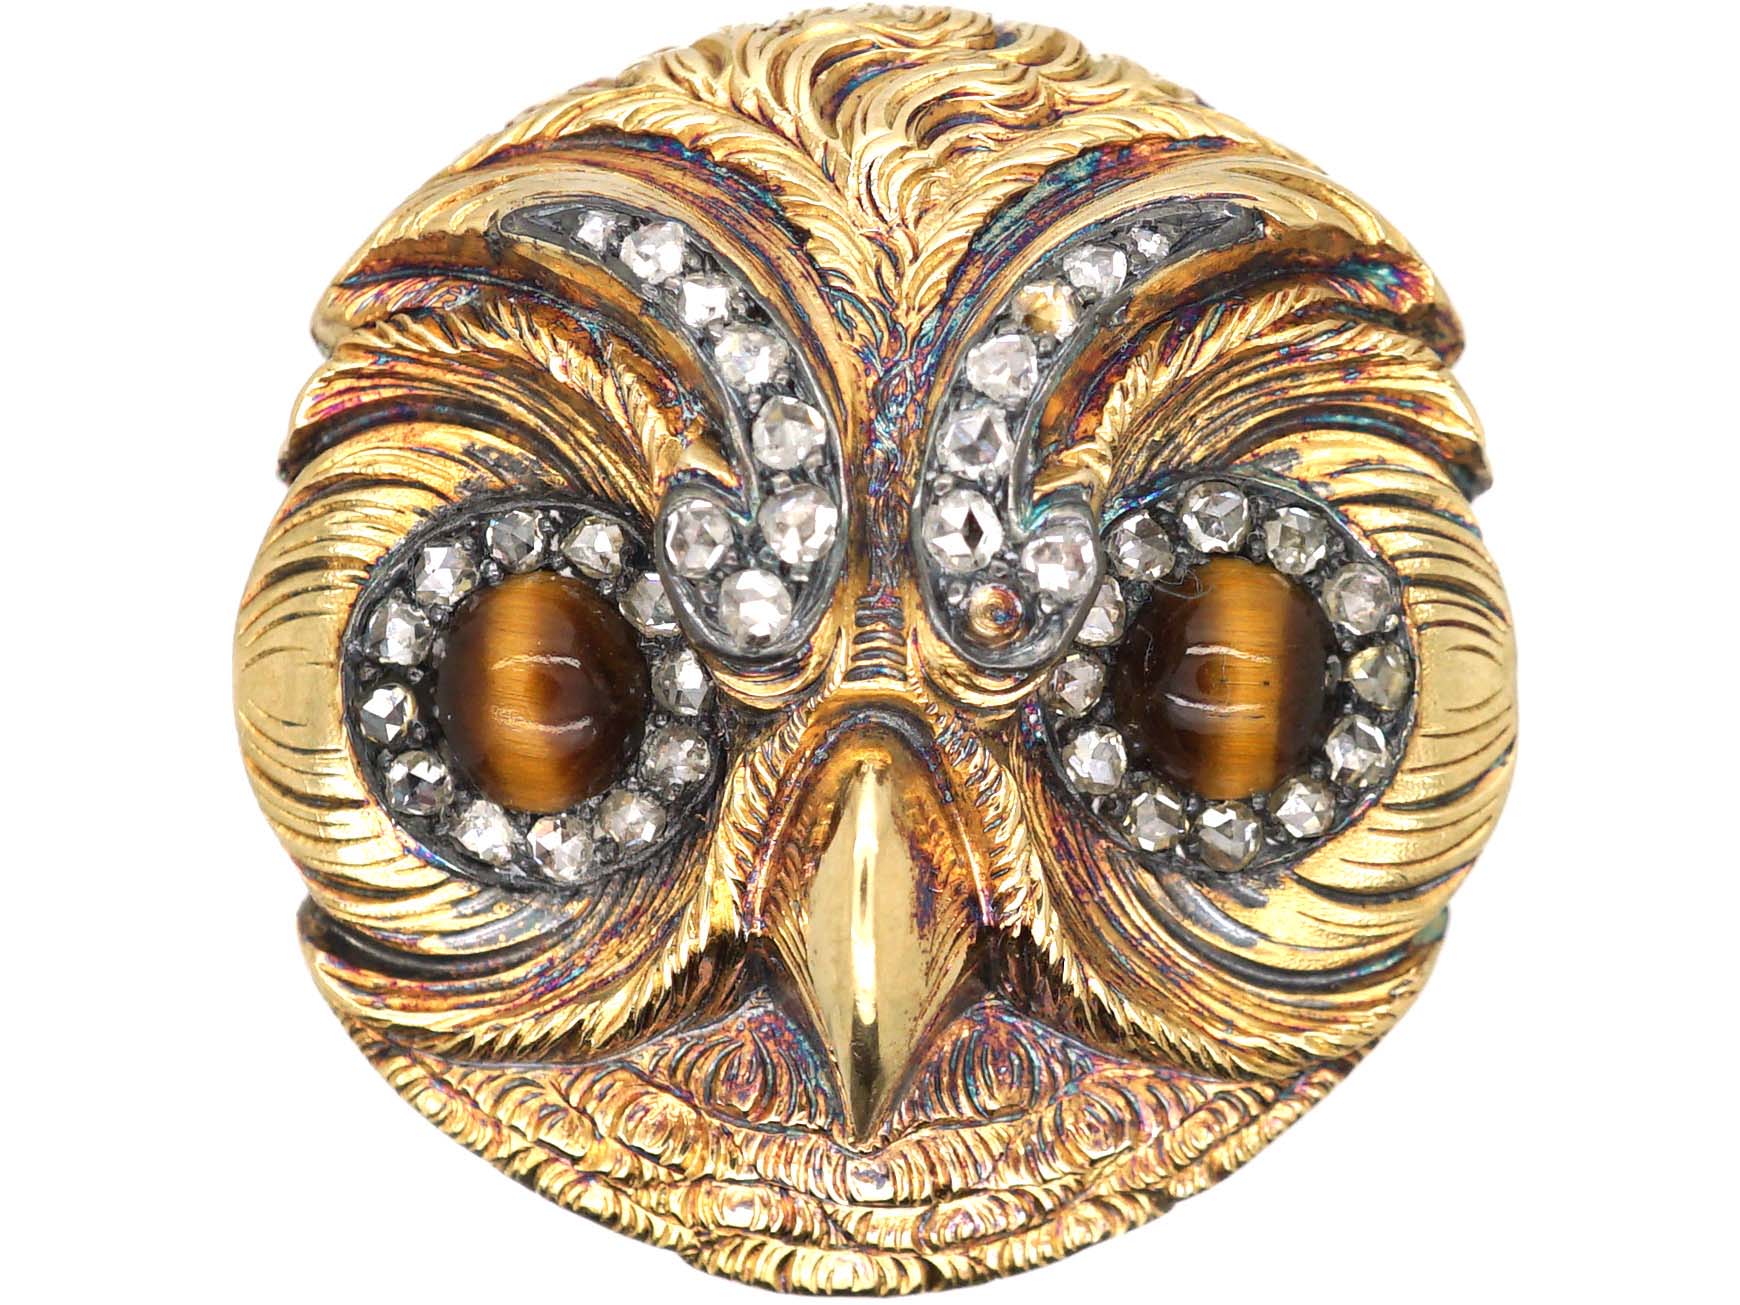 Owl Brooch / Pin - Bubo from Clash of the Titans – West Wolf Renaissance